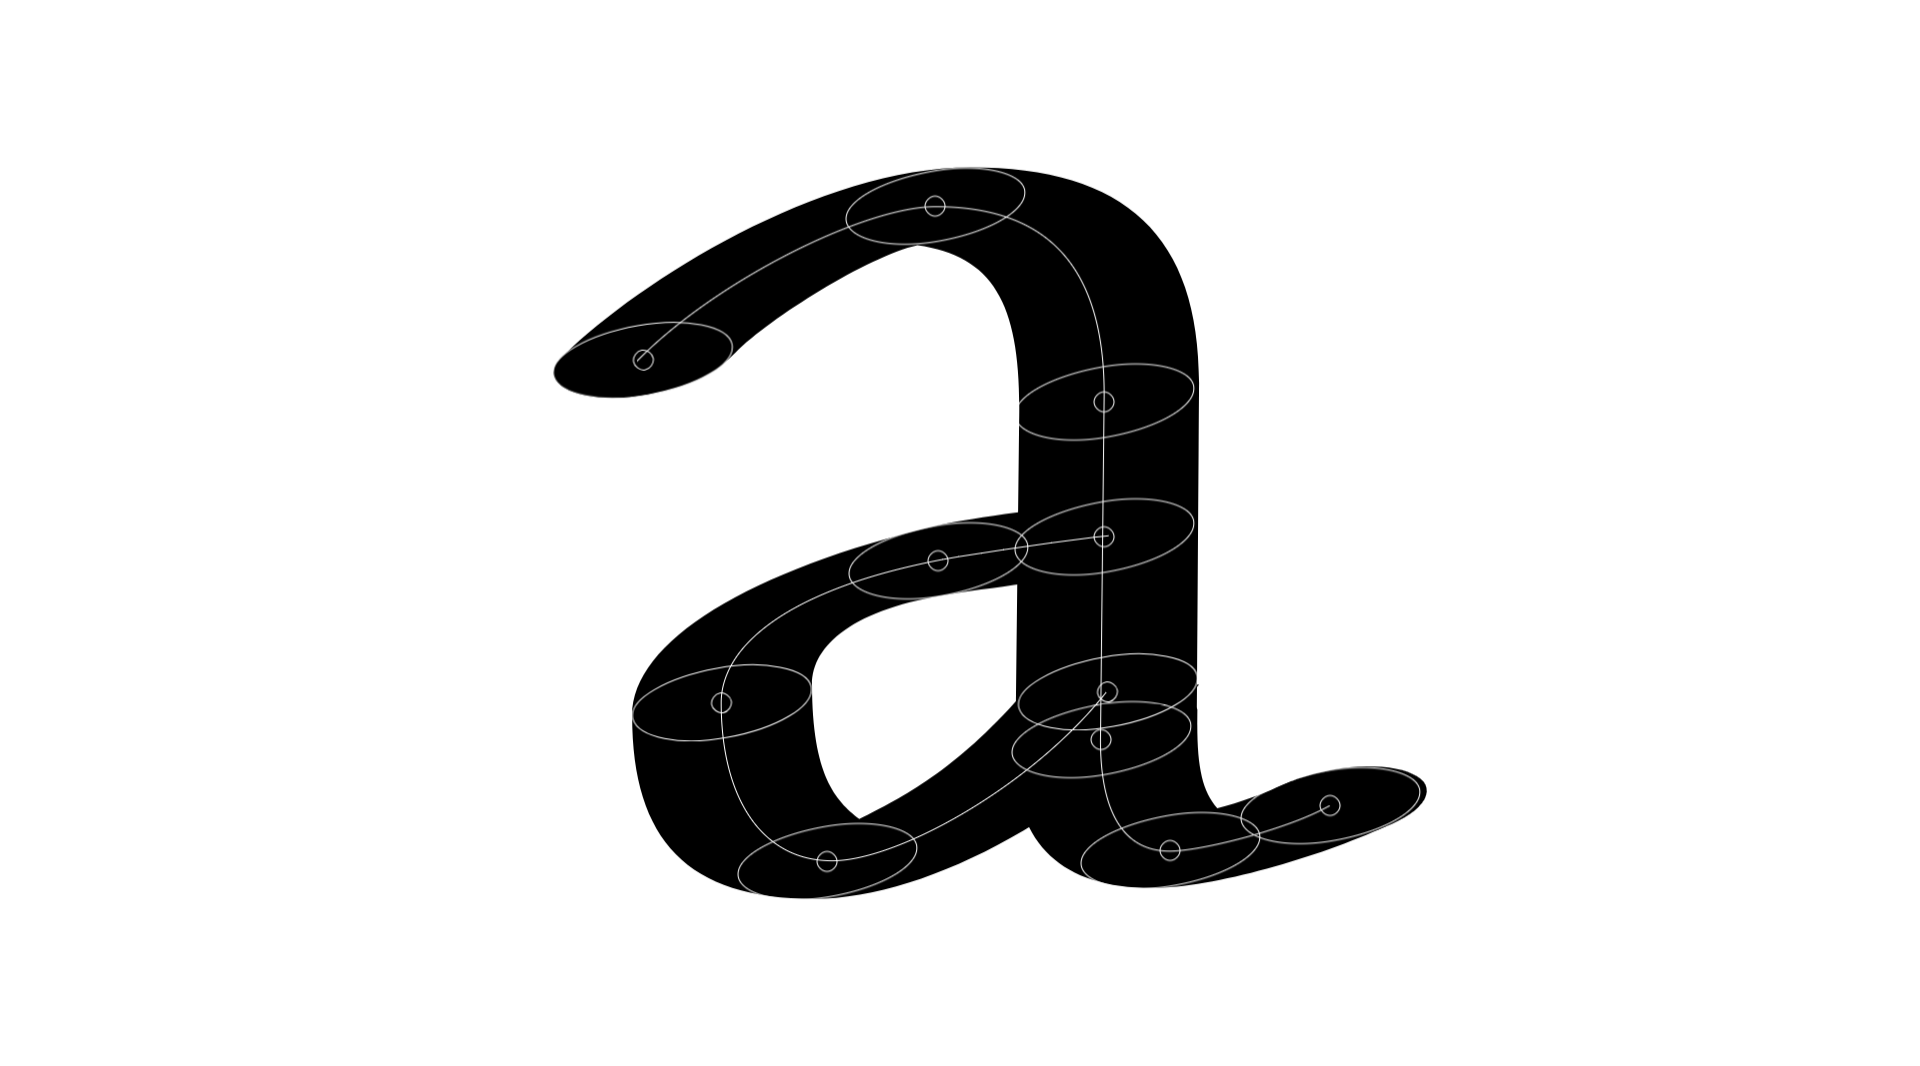 The most important feature is the individual width and angle control of every single point on the skeleton. Skeleton type design brush extension for Glyphsapp. 